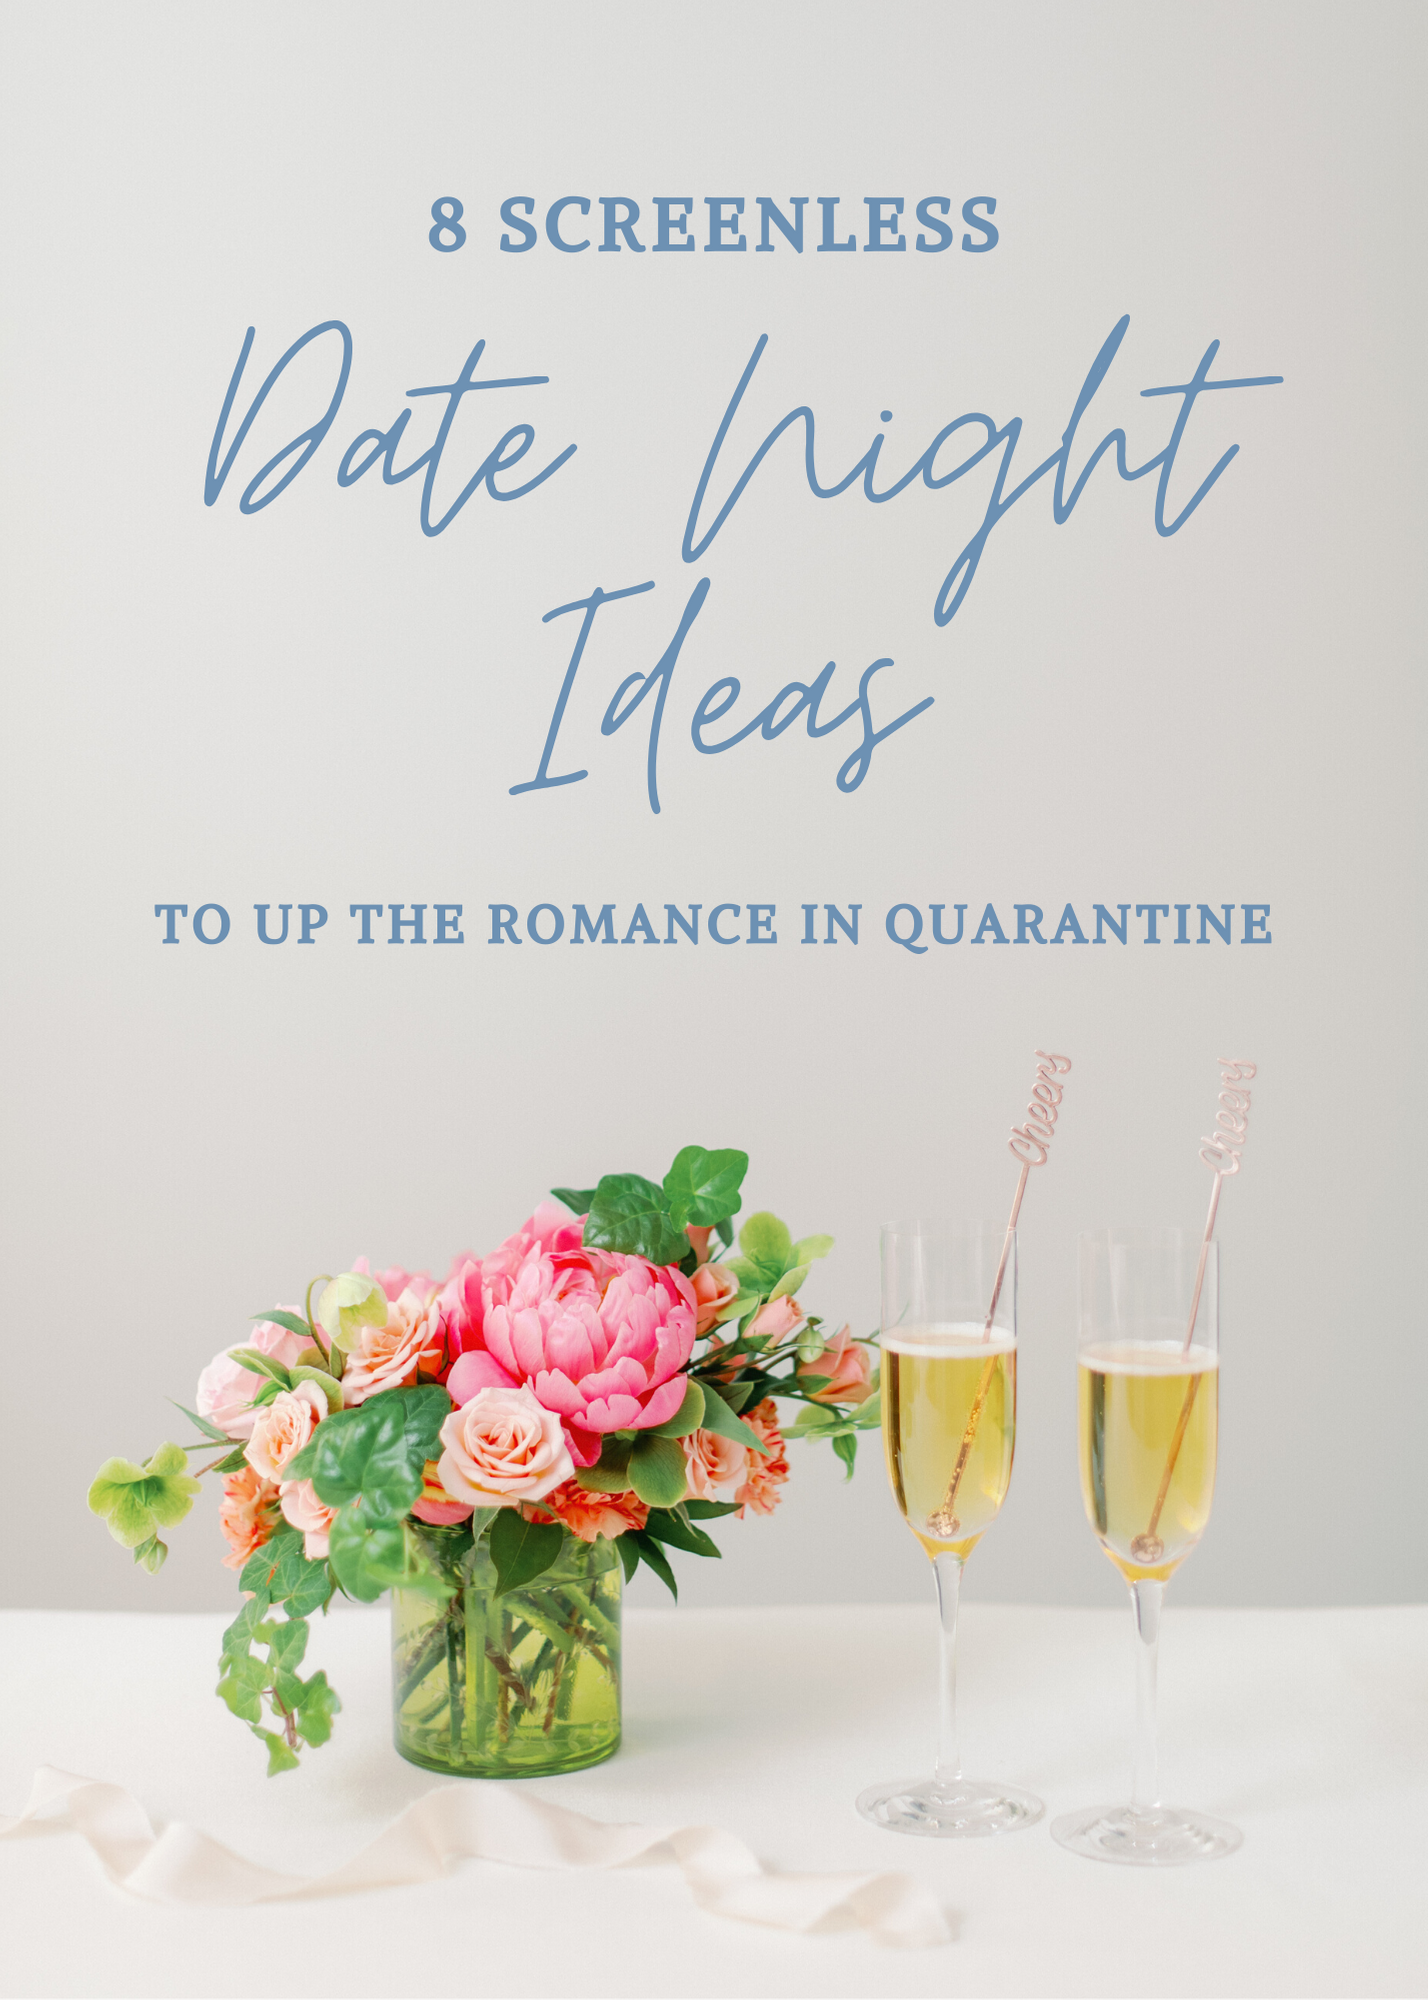 Eight Screenless Date Night Ideas To Up The Romance In Quarantine